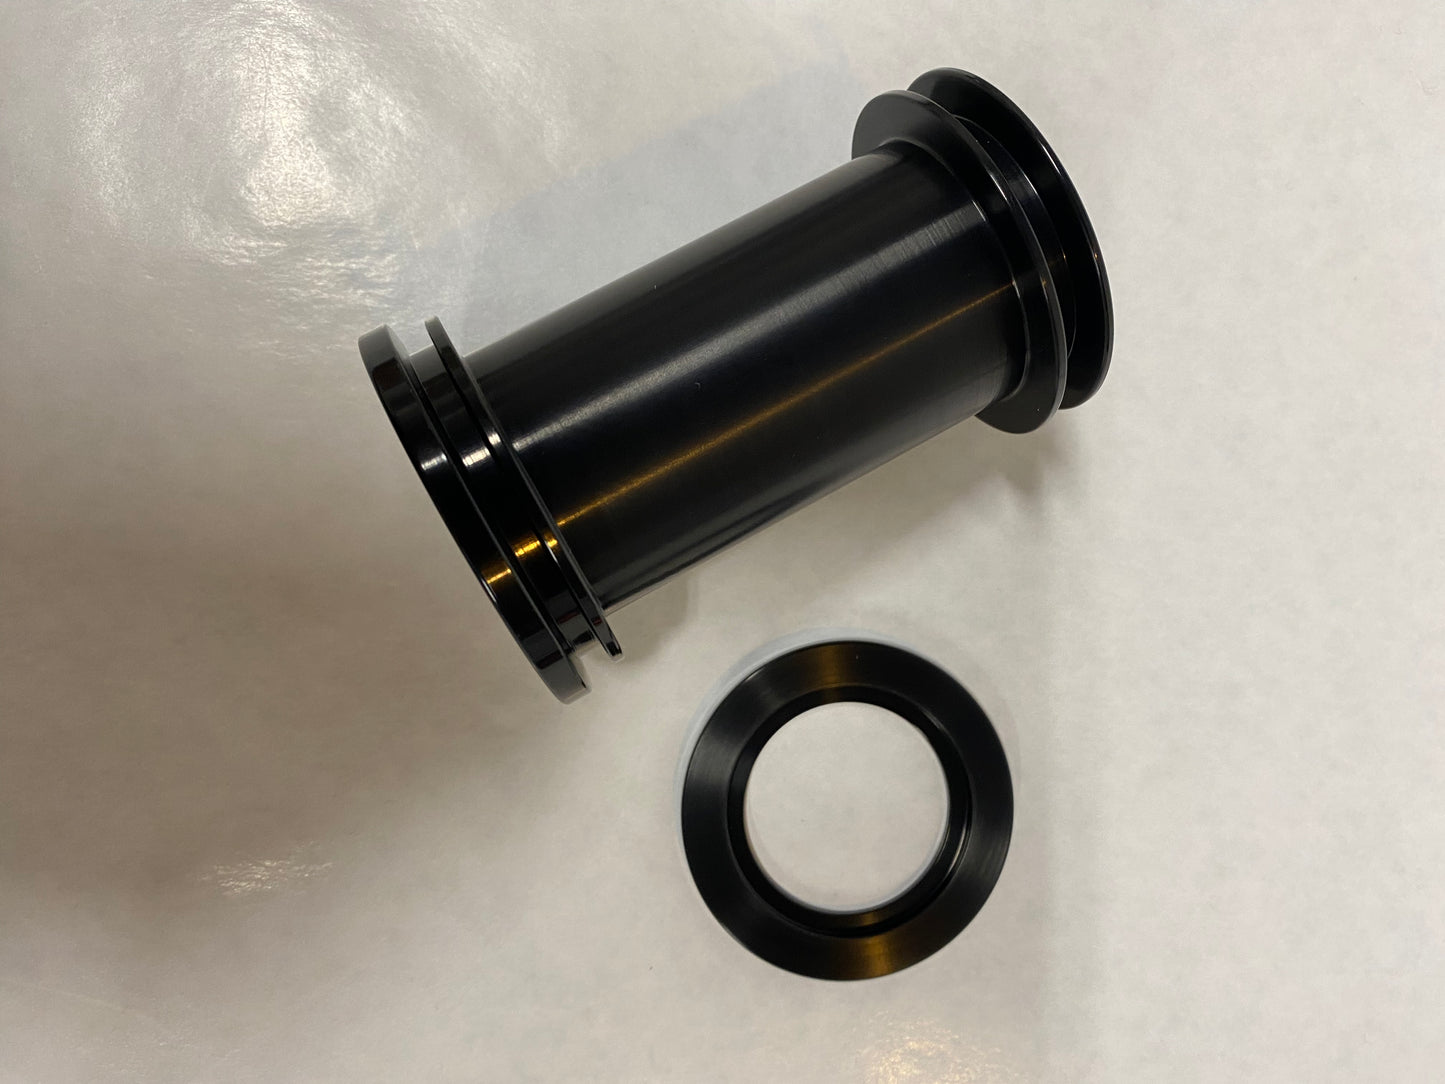 A3854 Aero pack Motor Adapter Assembly - 38mm to 54mm